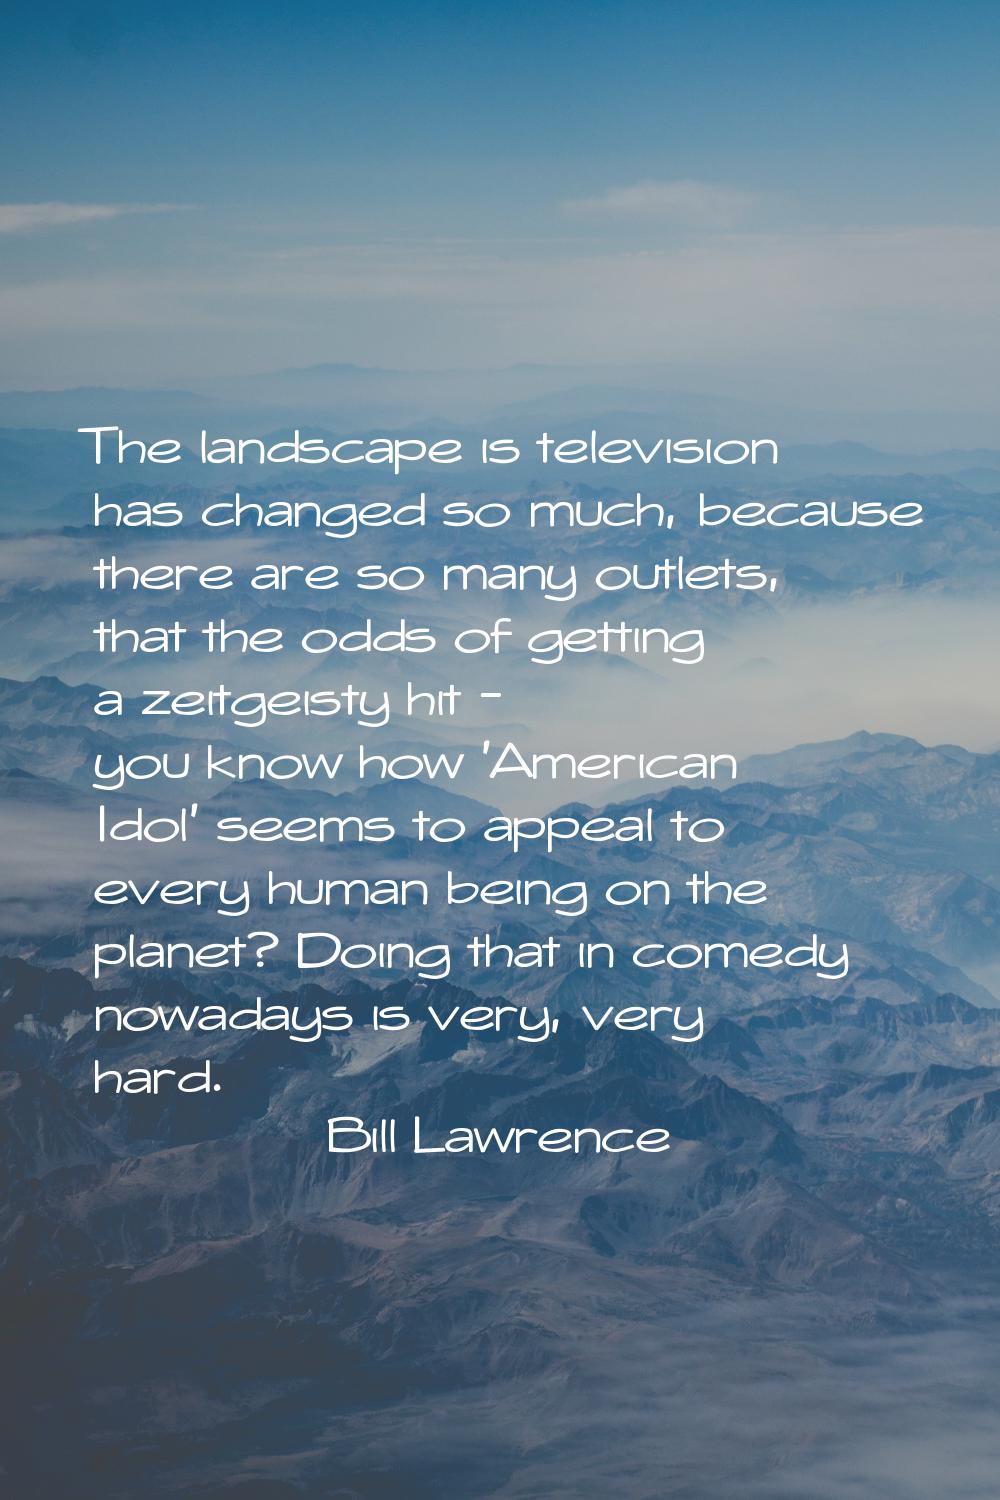 The landscape is television has changed so much, because there are so many outlets, that the odds o